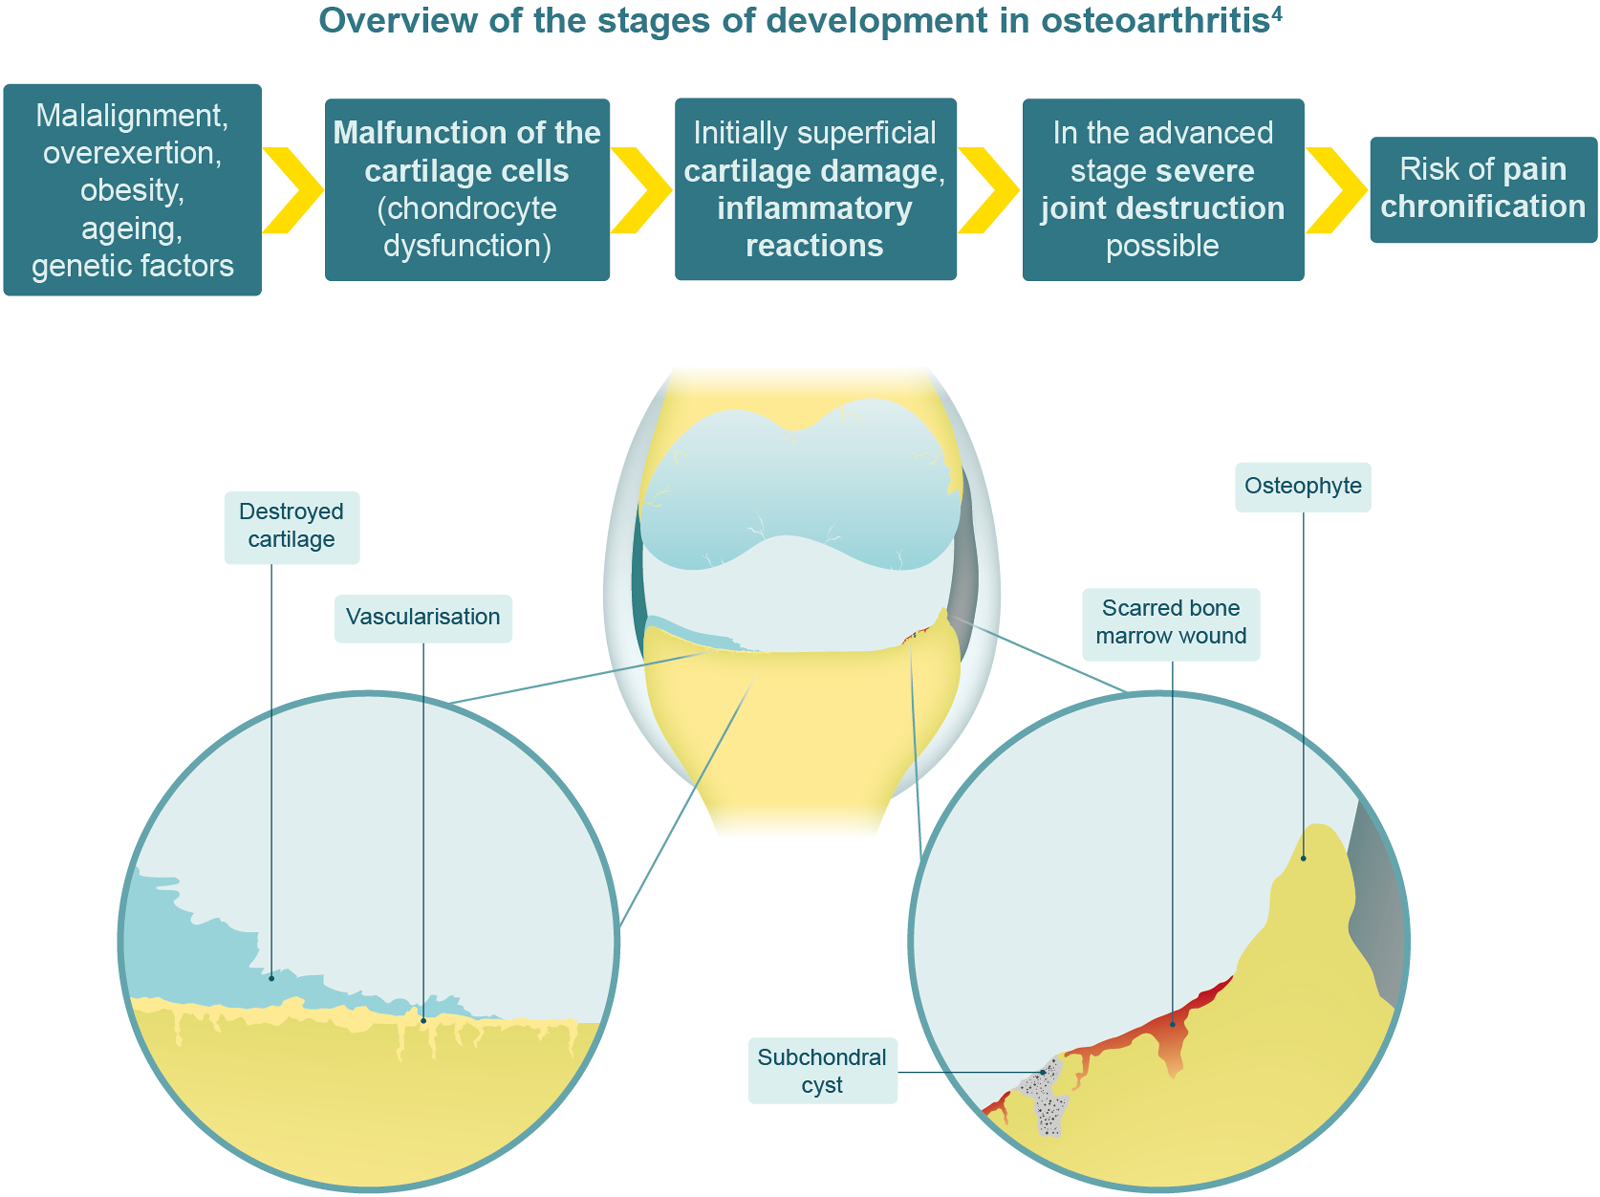 Overview of the stages of development in osteoarthritis